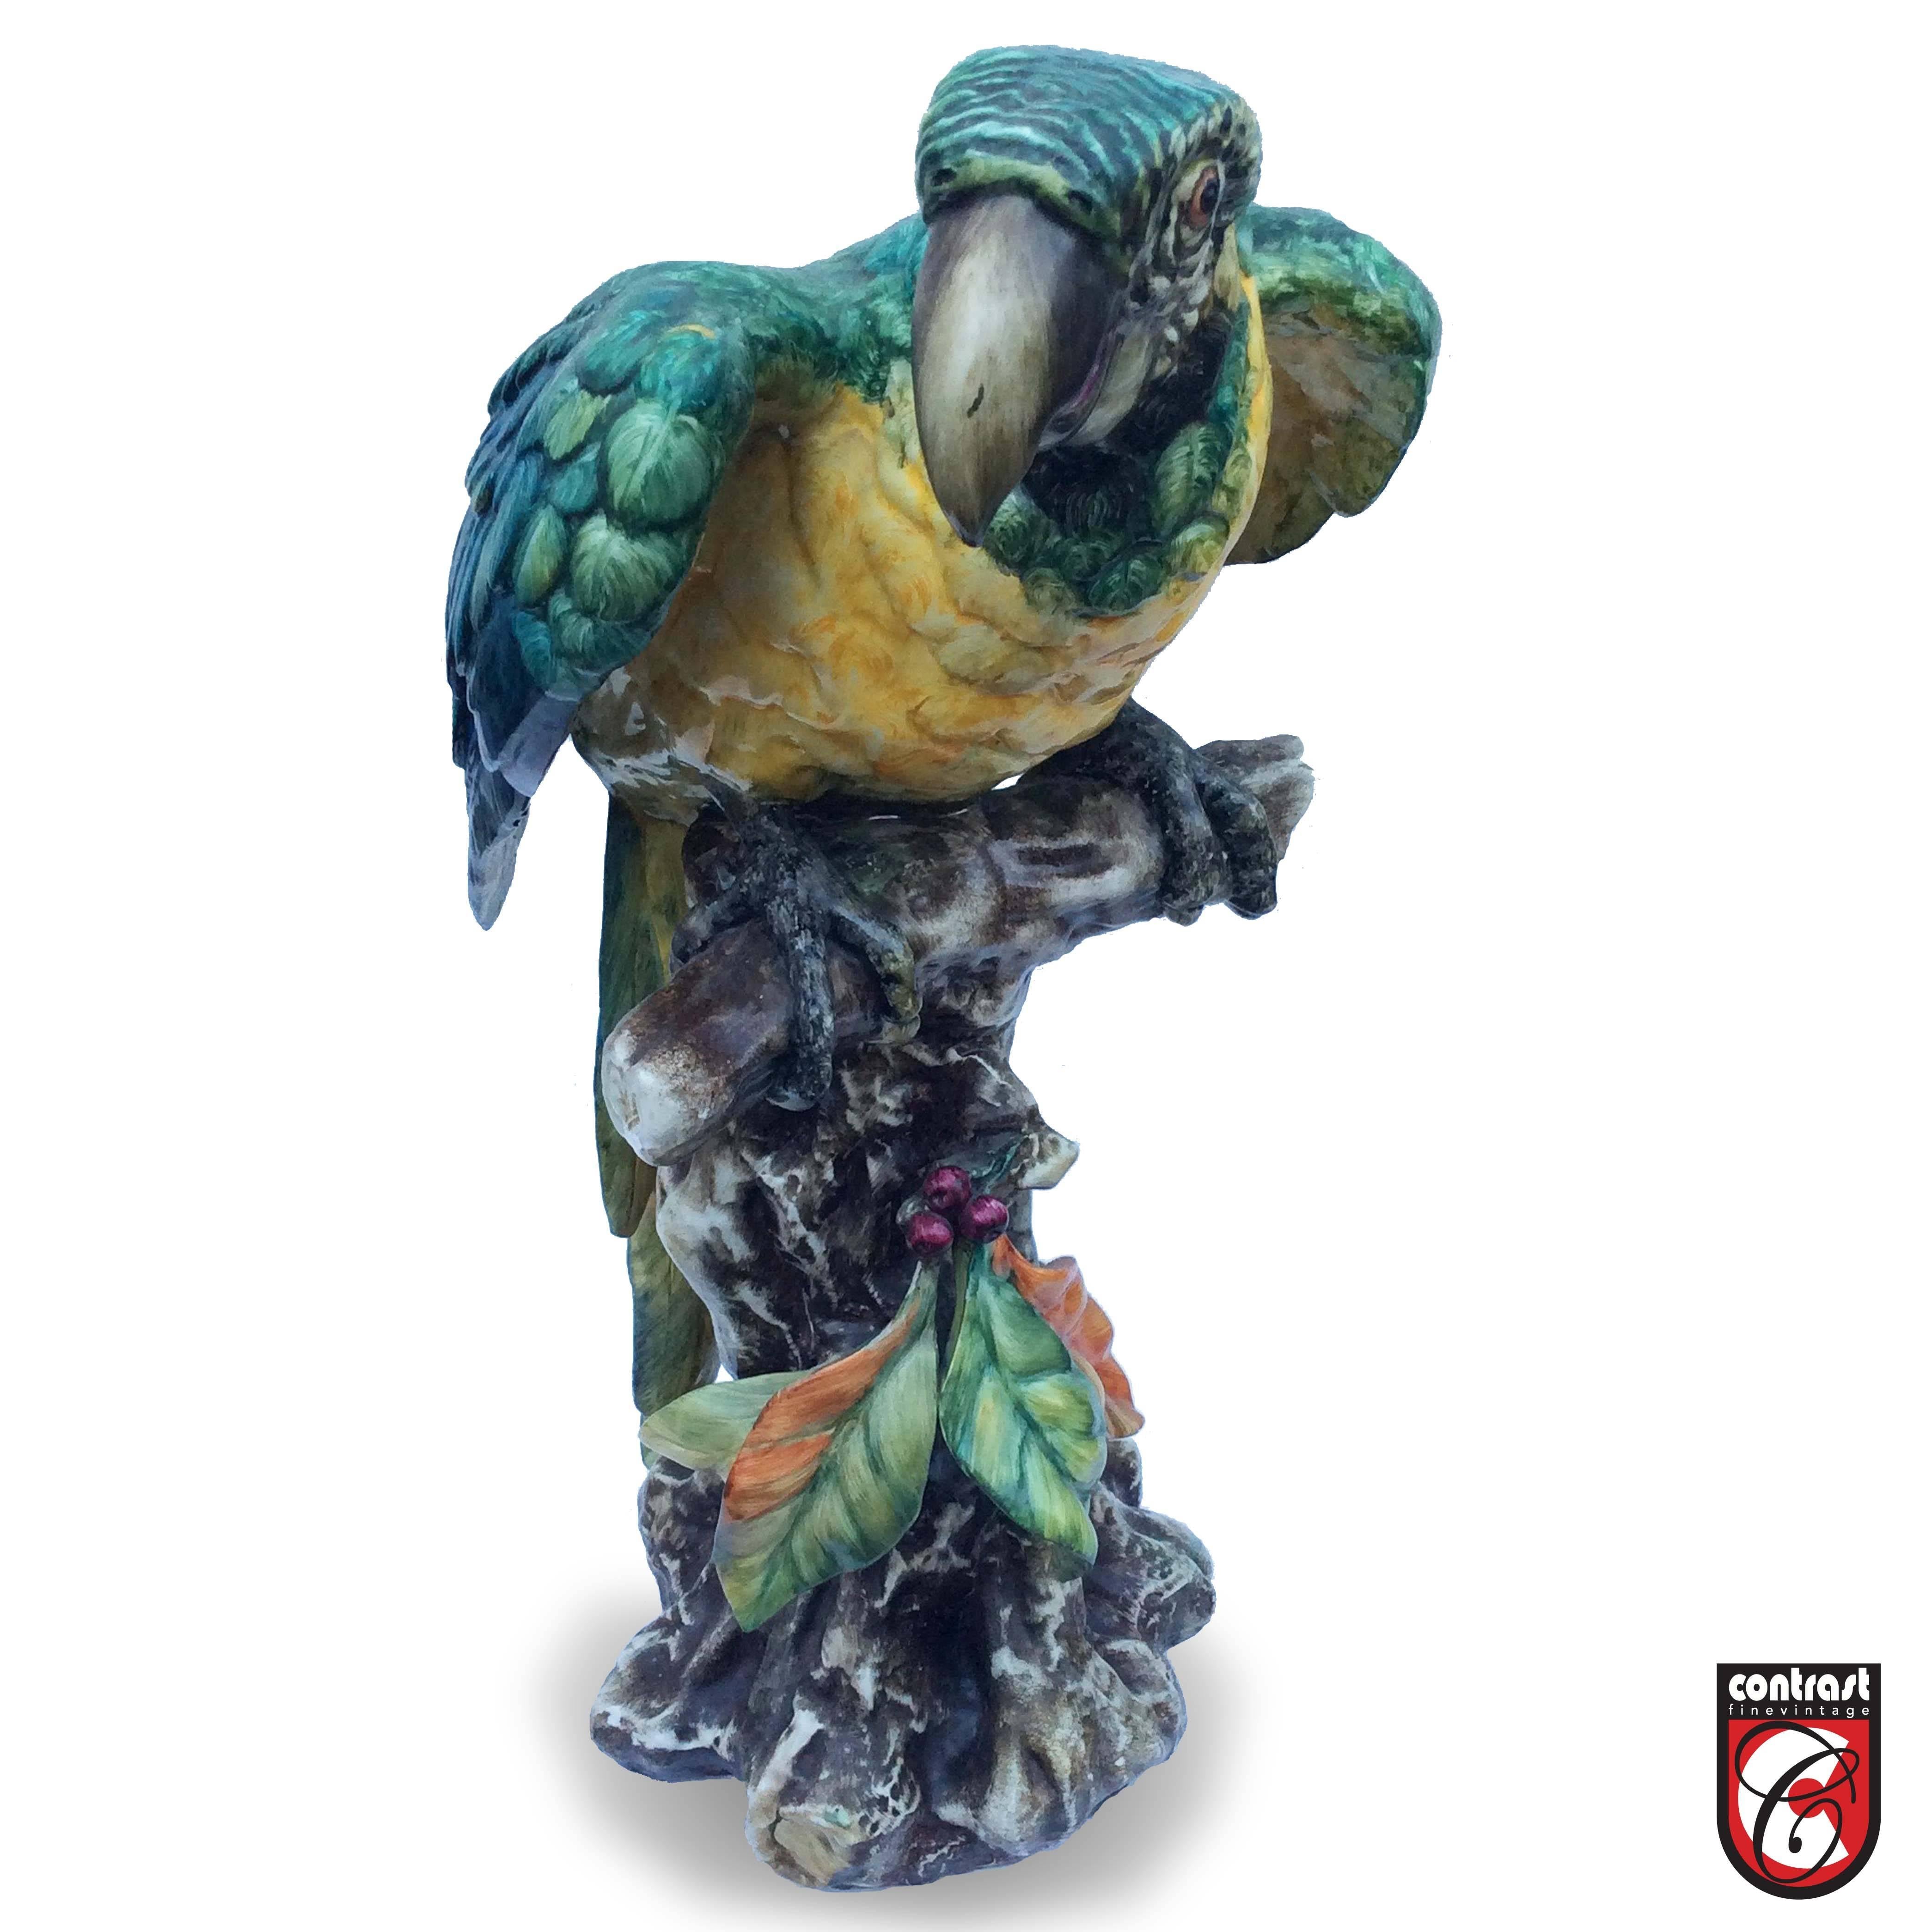 An Italian porcelain parrot statue signed Guido Cacciapuoti, 1892-1953 (Italian School) Cacciapuoti along with his brothers, father and grandfather had a long family history of making ceramic sculptures in gres. He is considered the best Italian